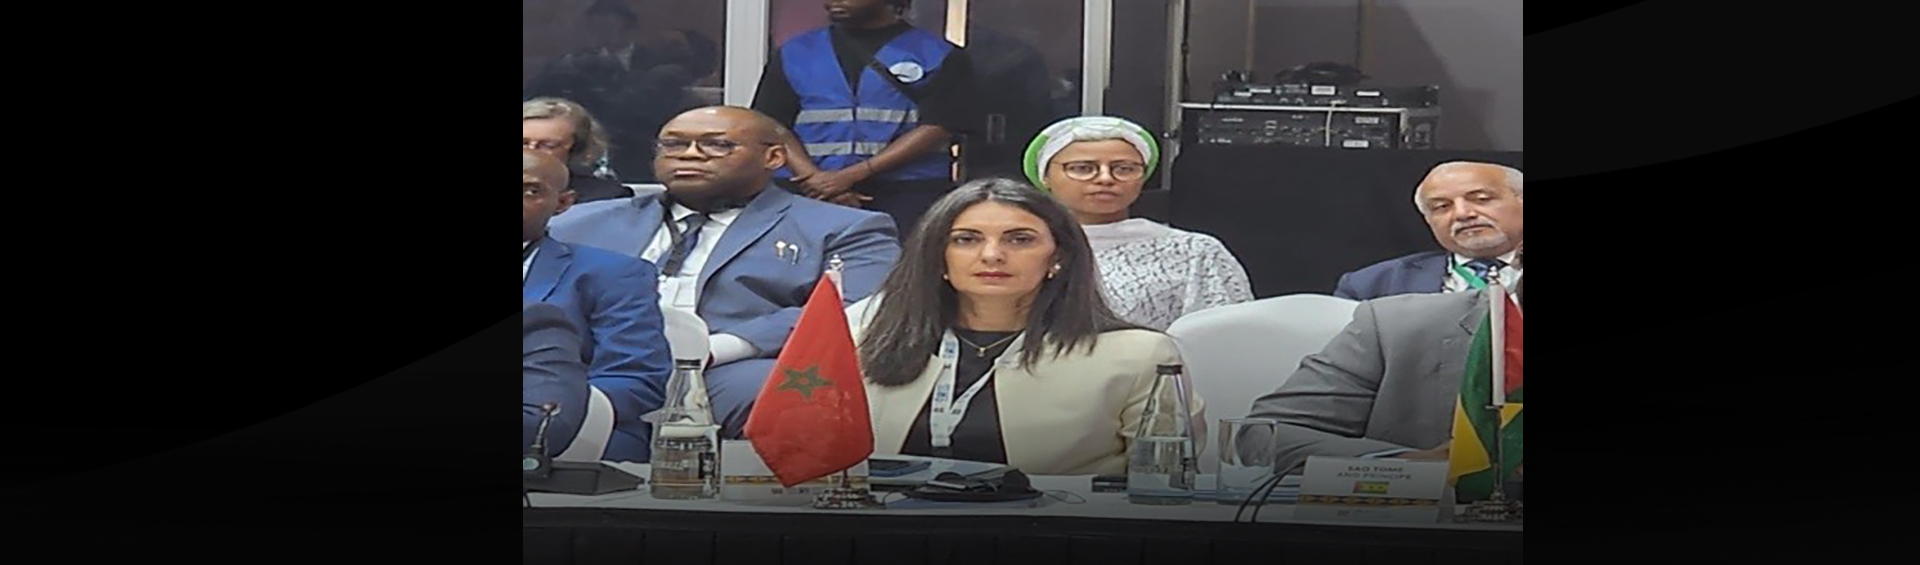 The Minister of Economy and Finance represents his majesty the king at the African Heads of State Summit on the 21st replenishment of the International Development Association